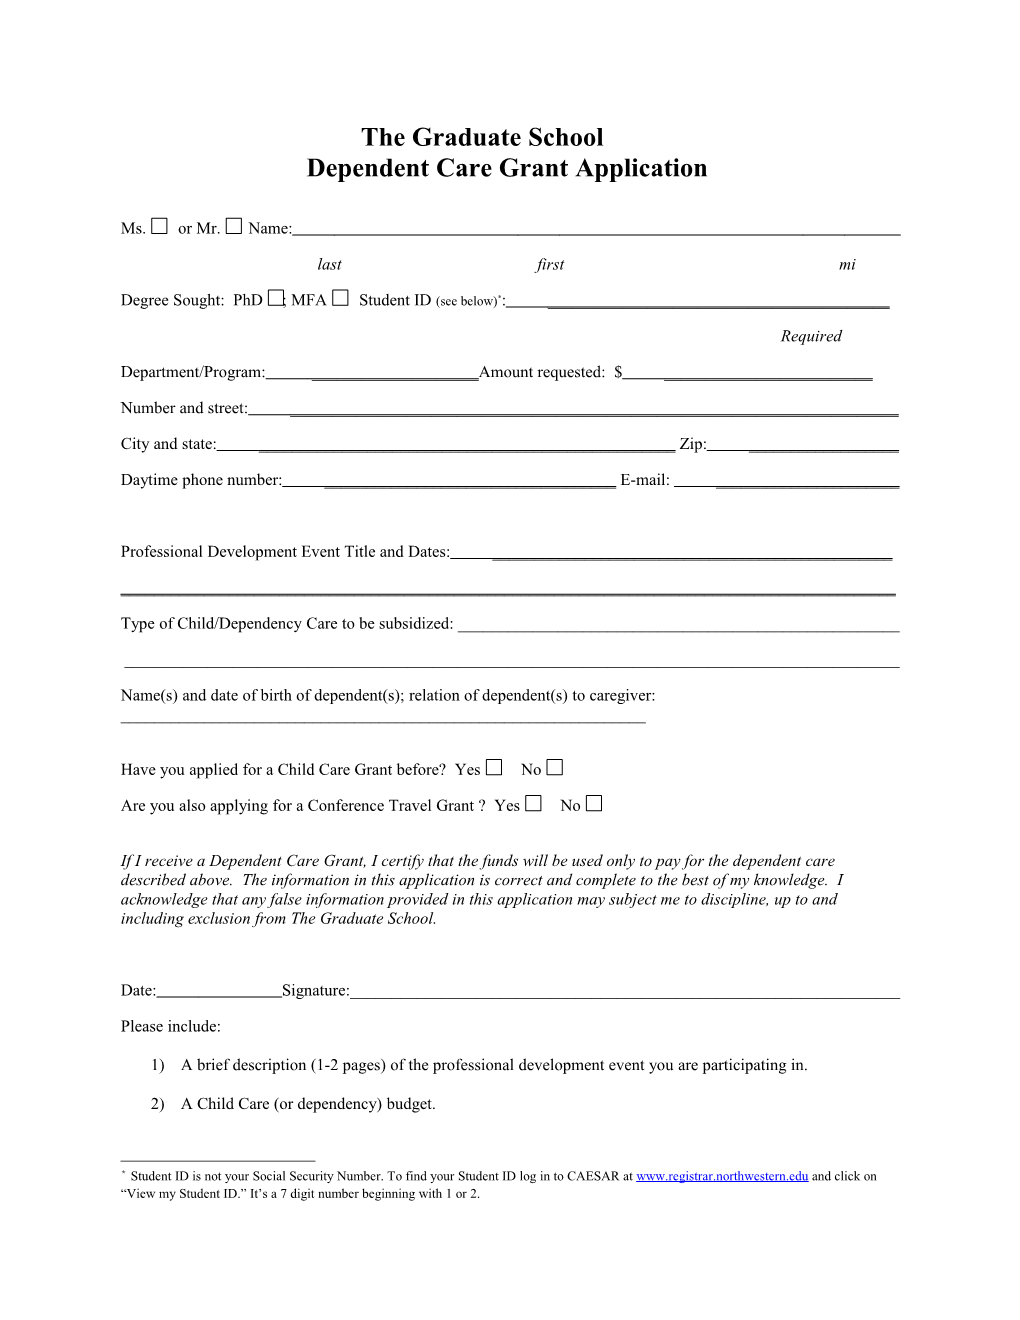 Dependent Care Grant Application